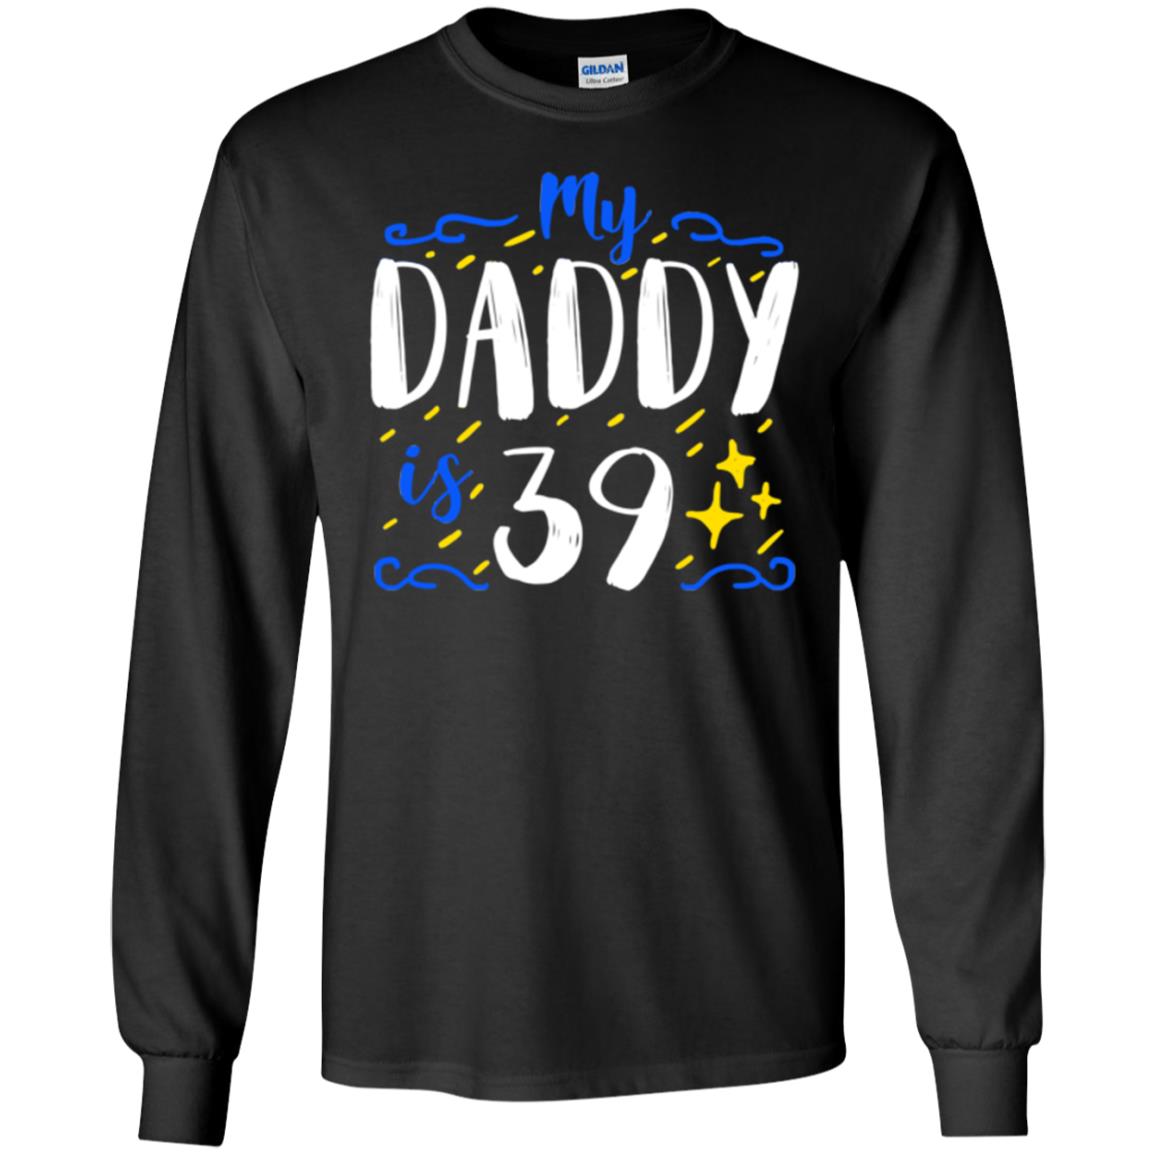 My Daddy Is 39 39th Birthday Daddy Shirt For Sons Or DaughtersG240 Gildan LS Ultra Cotton T-Shirt